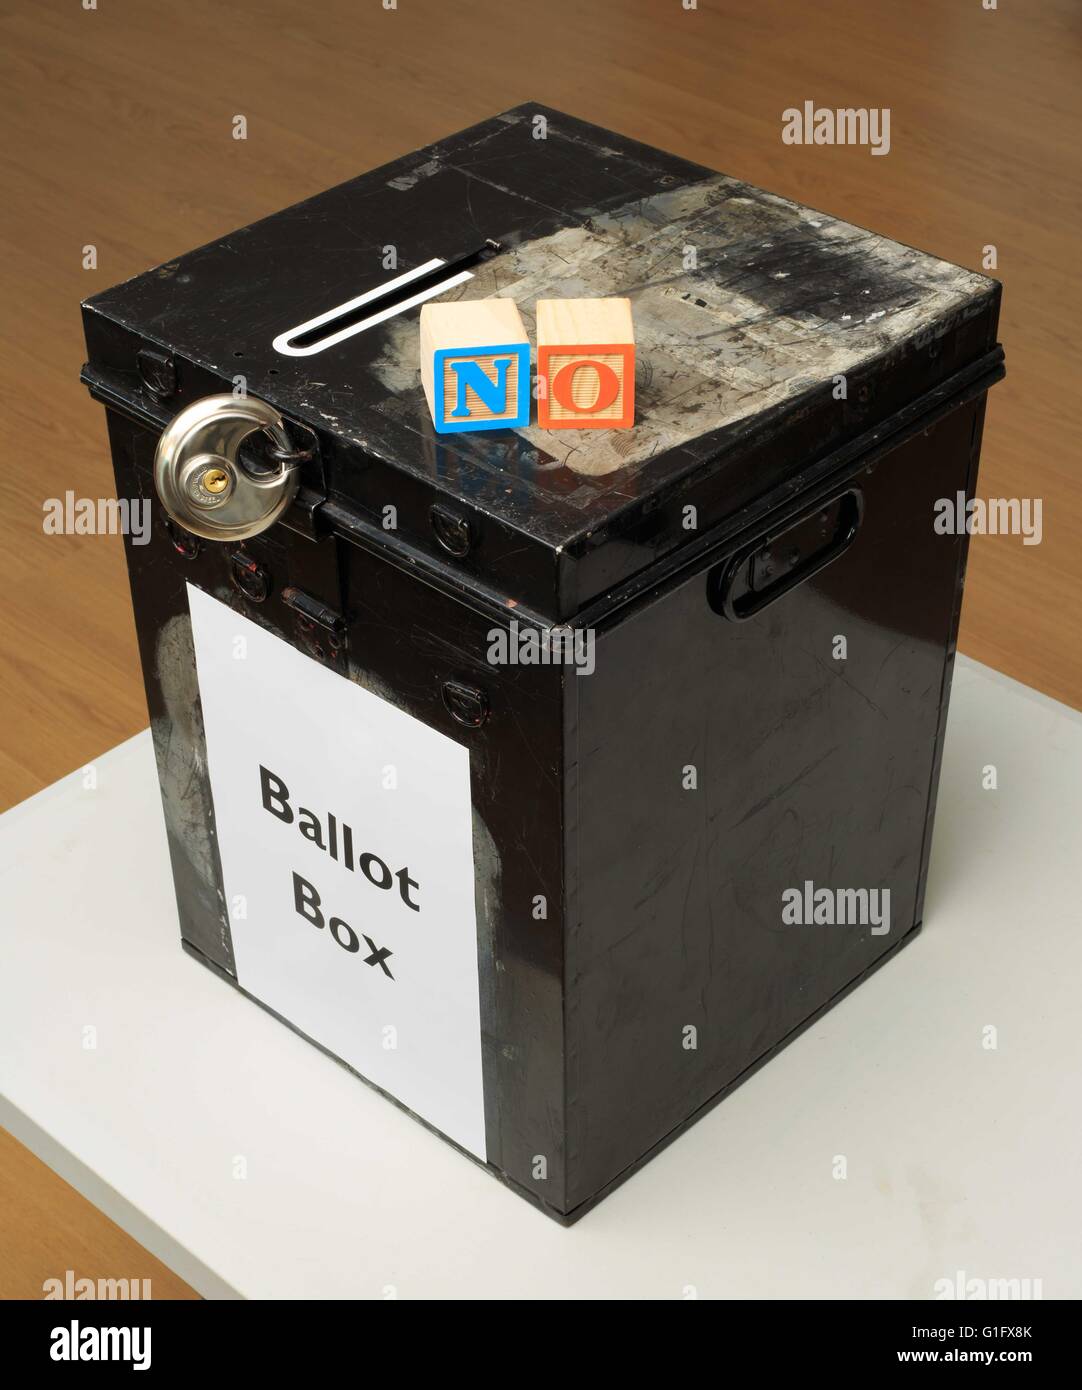 UK ballot box and childs' ABC blocks stating "No" in reference to a vote. Stock Photo